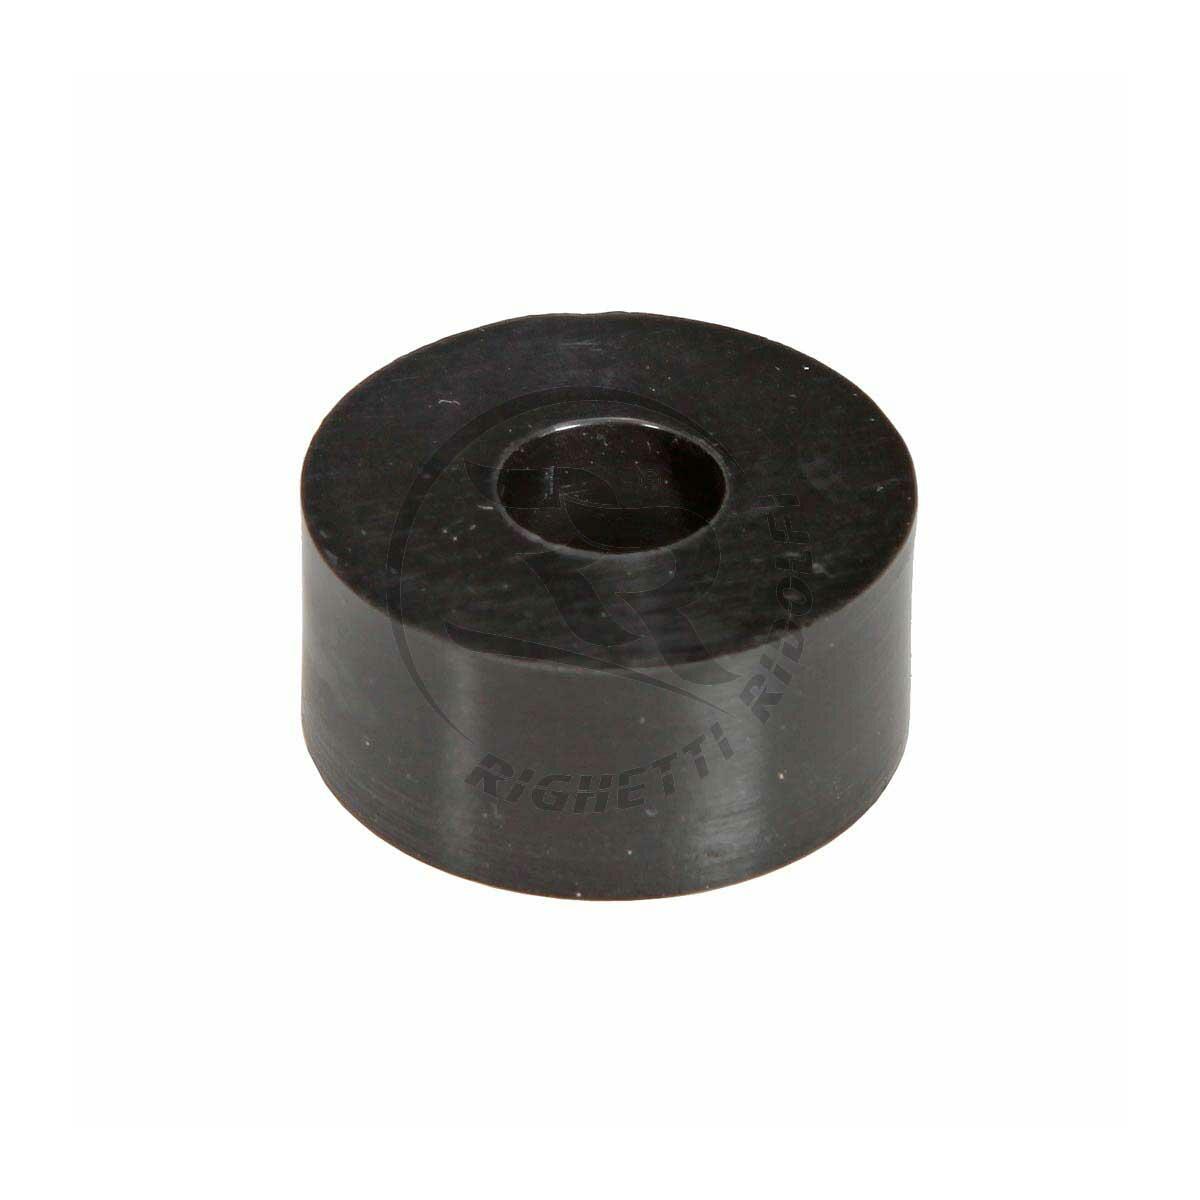 Sizes 10mm to 50mm diameter 3mm thick Black Acrylic Washers Packs of 10 